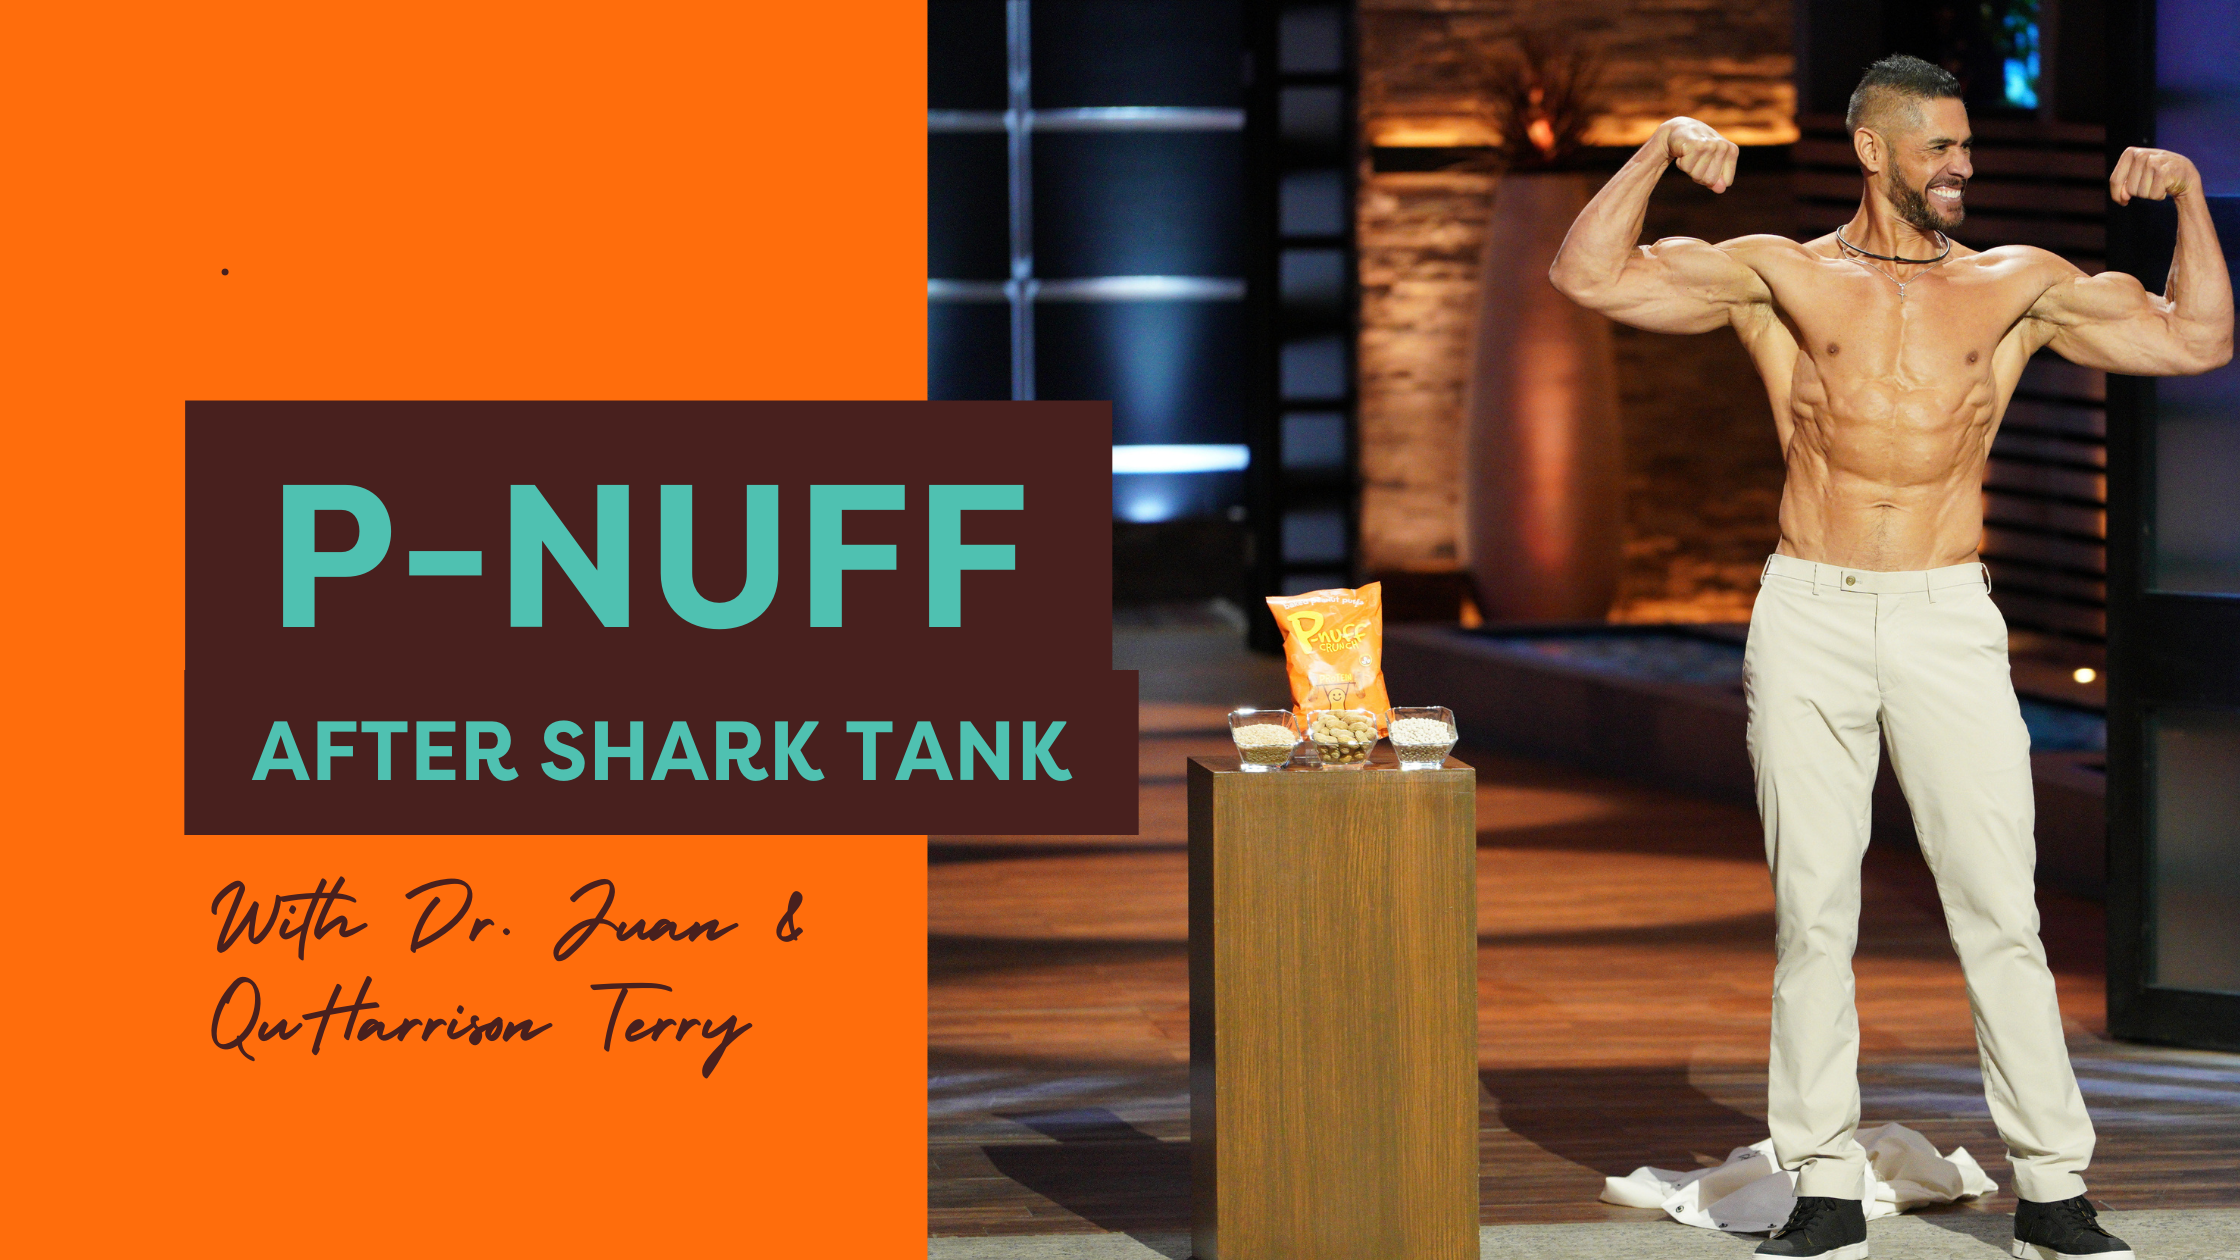 Where is P-NUFF Now? - Our Post-Shark Tank Journey